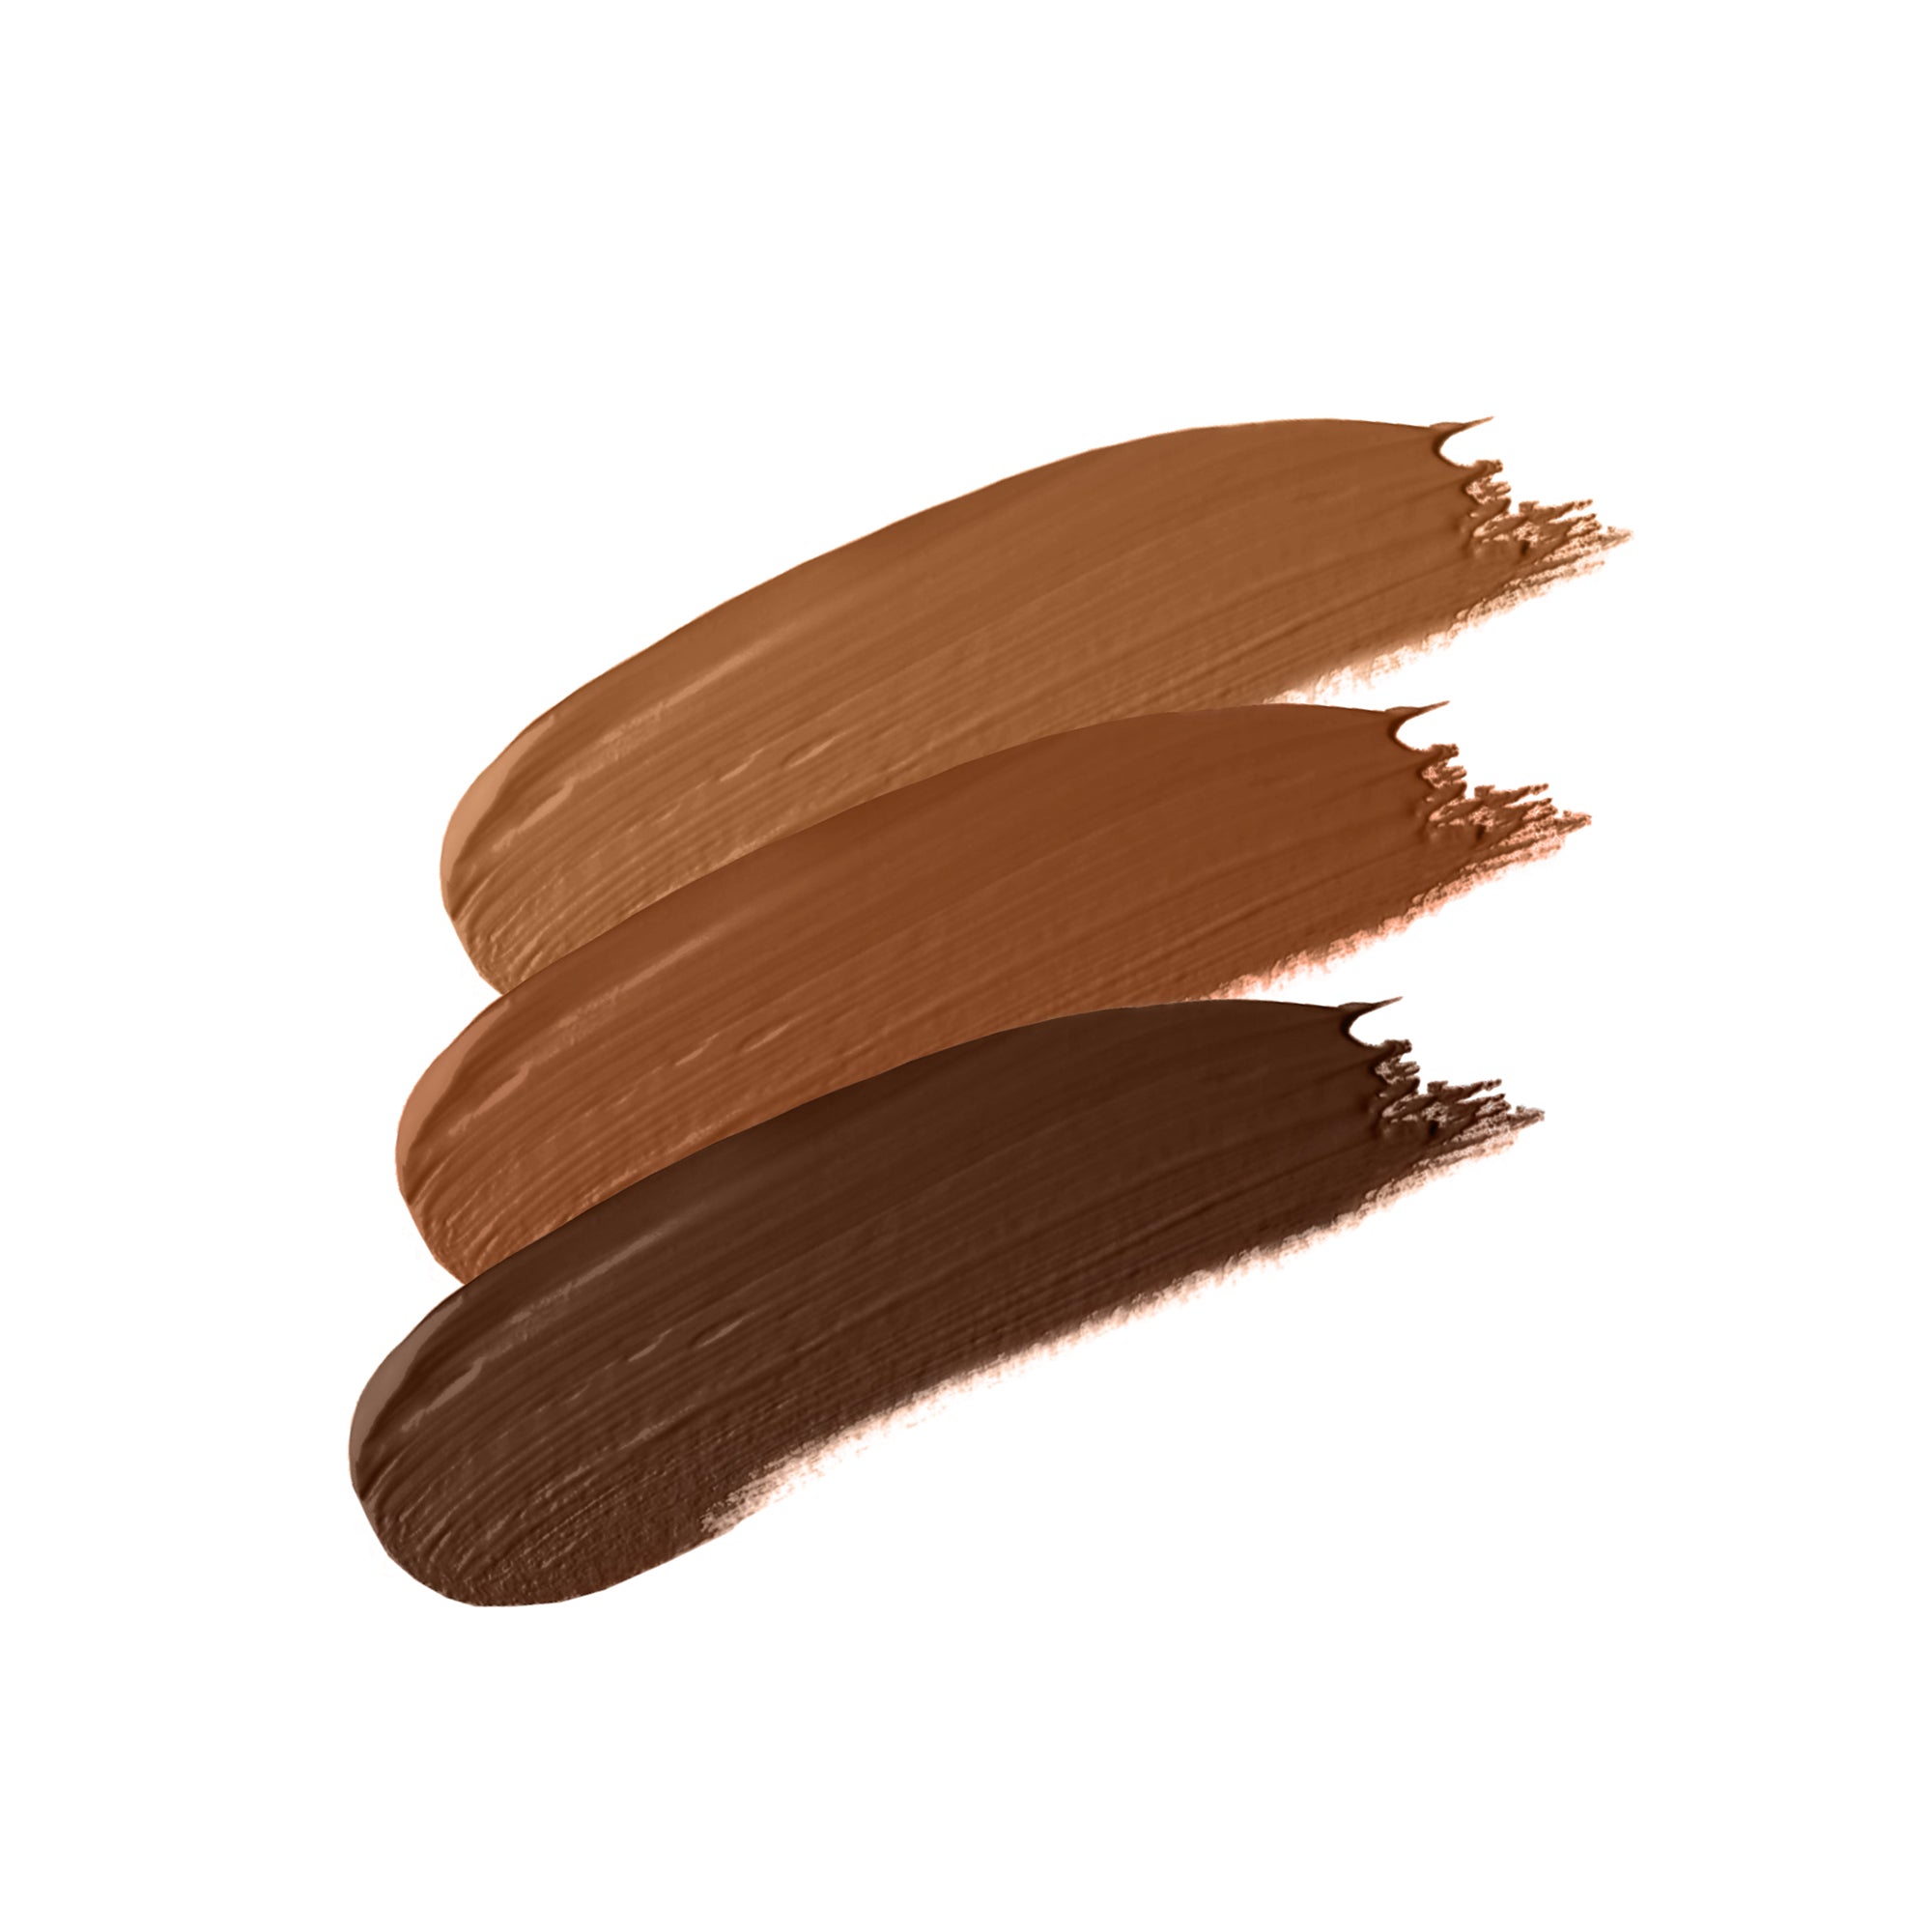 10 - DEEP CHOCOLATE - buildable, creamy, hydrating concealer in chocolate undertone shade ten in group shot